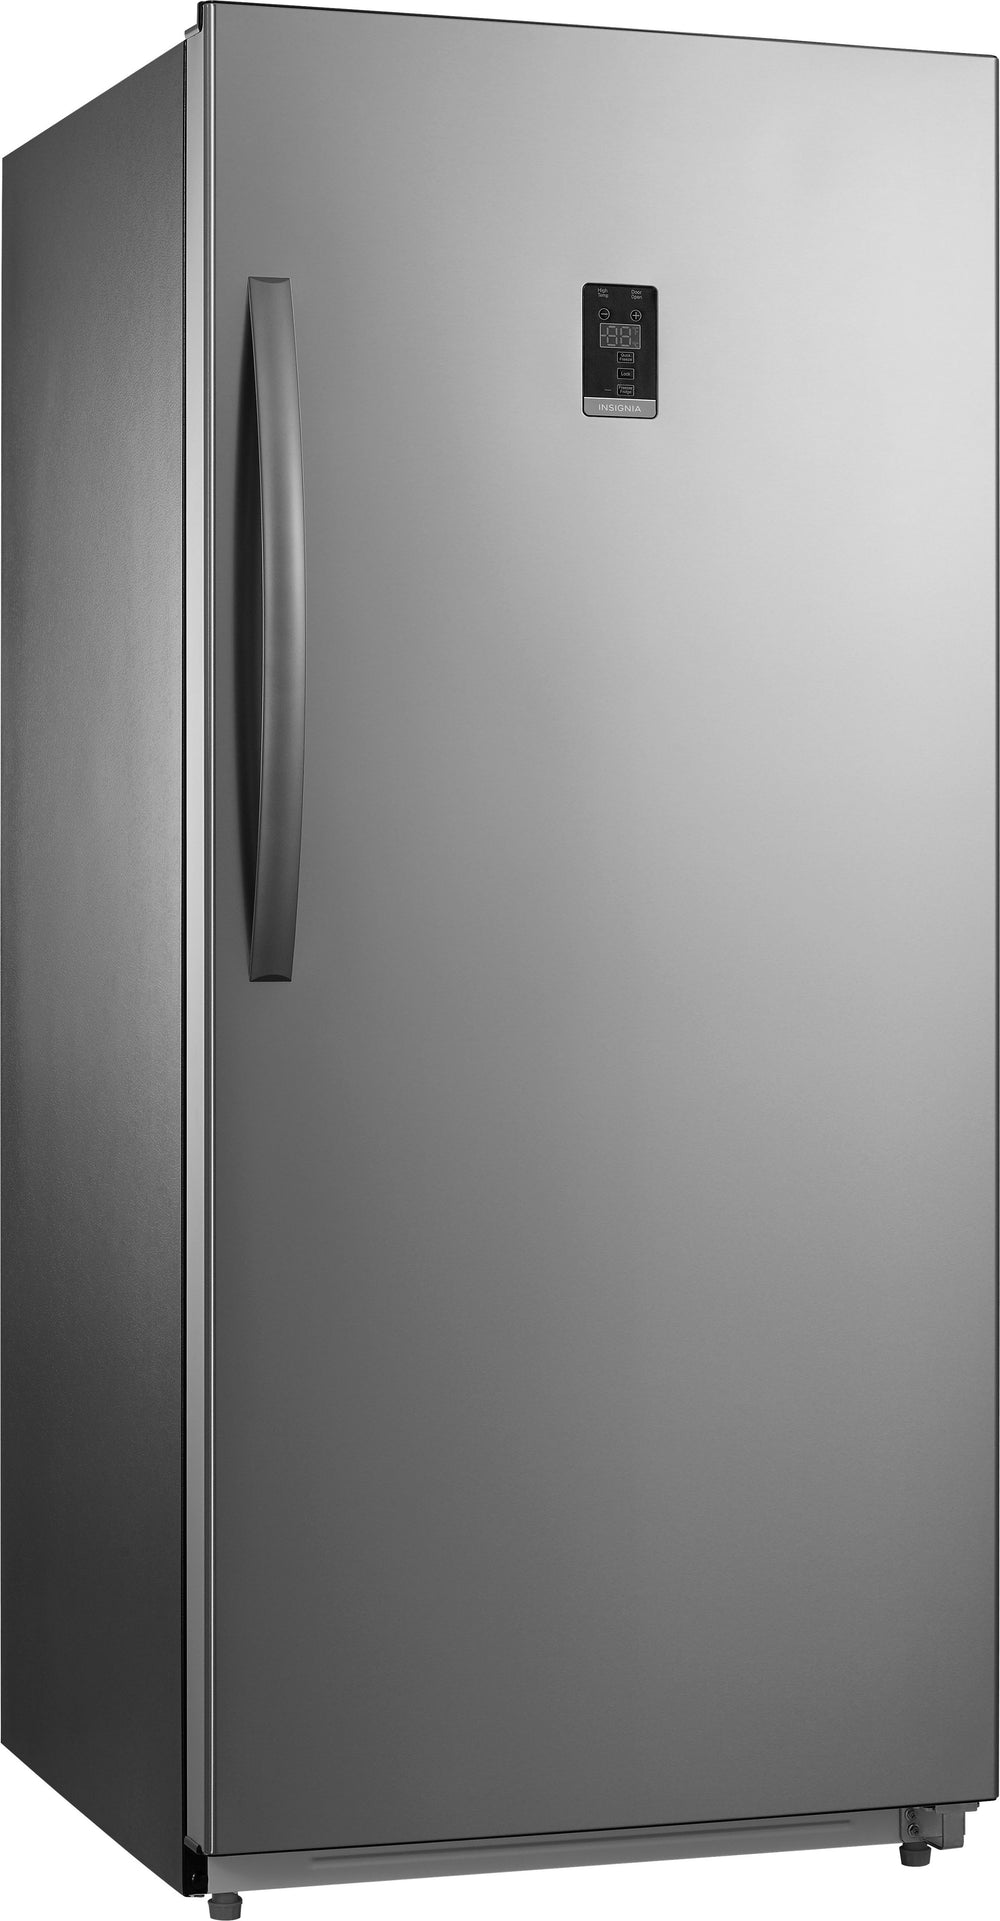 Insignia™ - 13.8 Cu. Ft. Upright Convertible Freezer/Refrigerator - Stainless steel_1